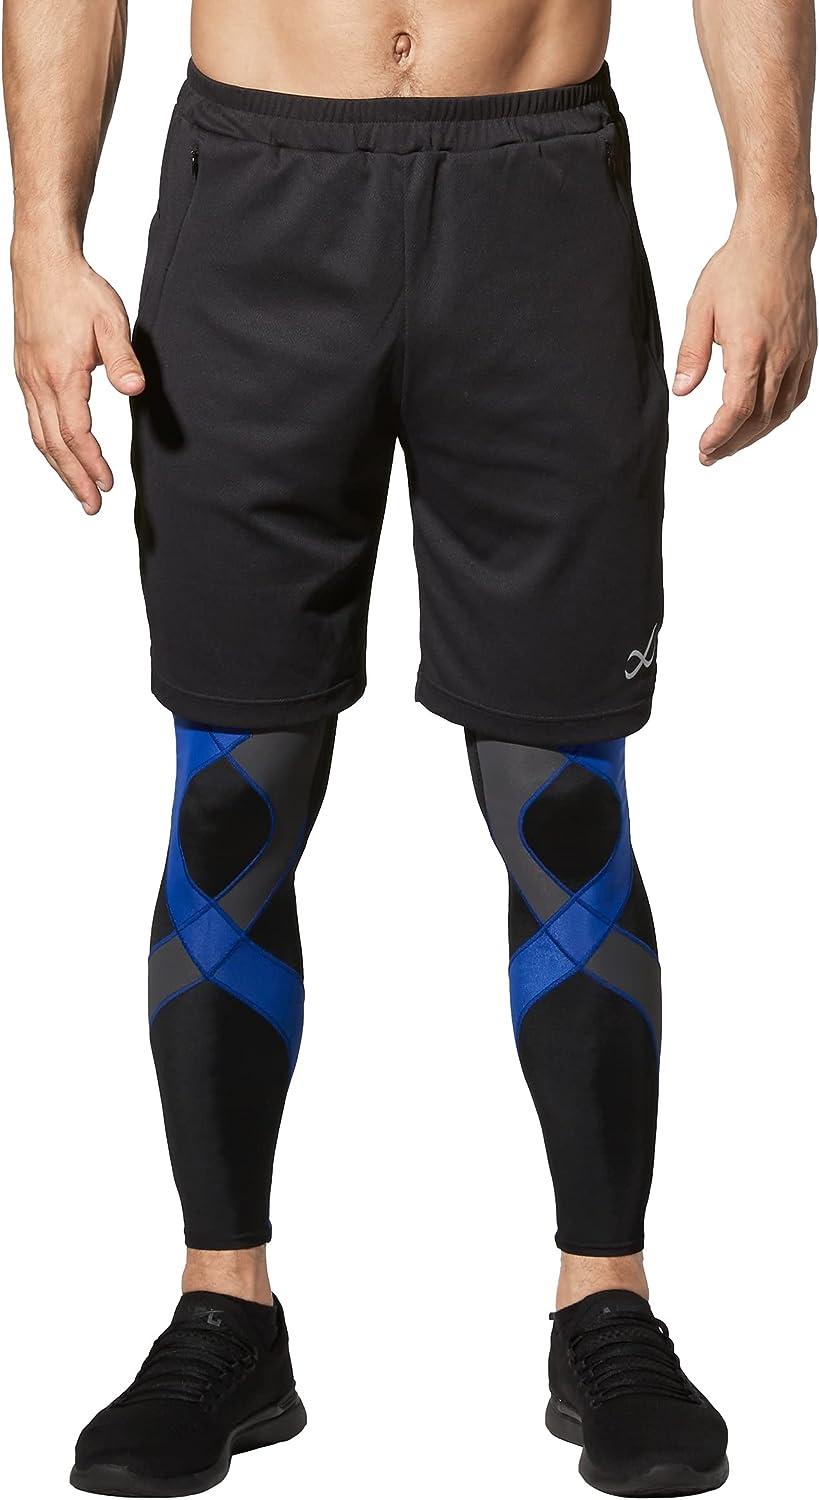 CW-X Men's Stabilyx Joint Support Compression Tights - Happy Trails